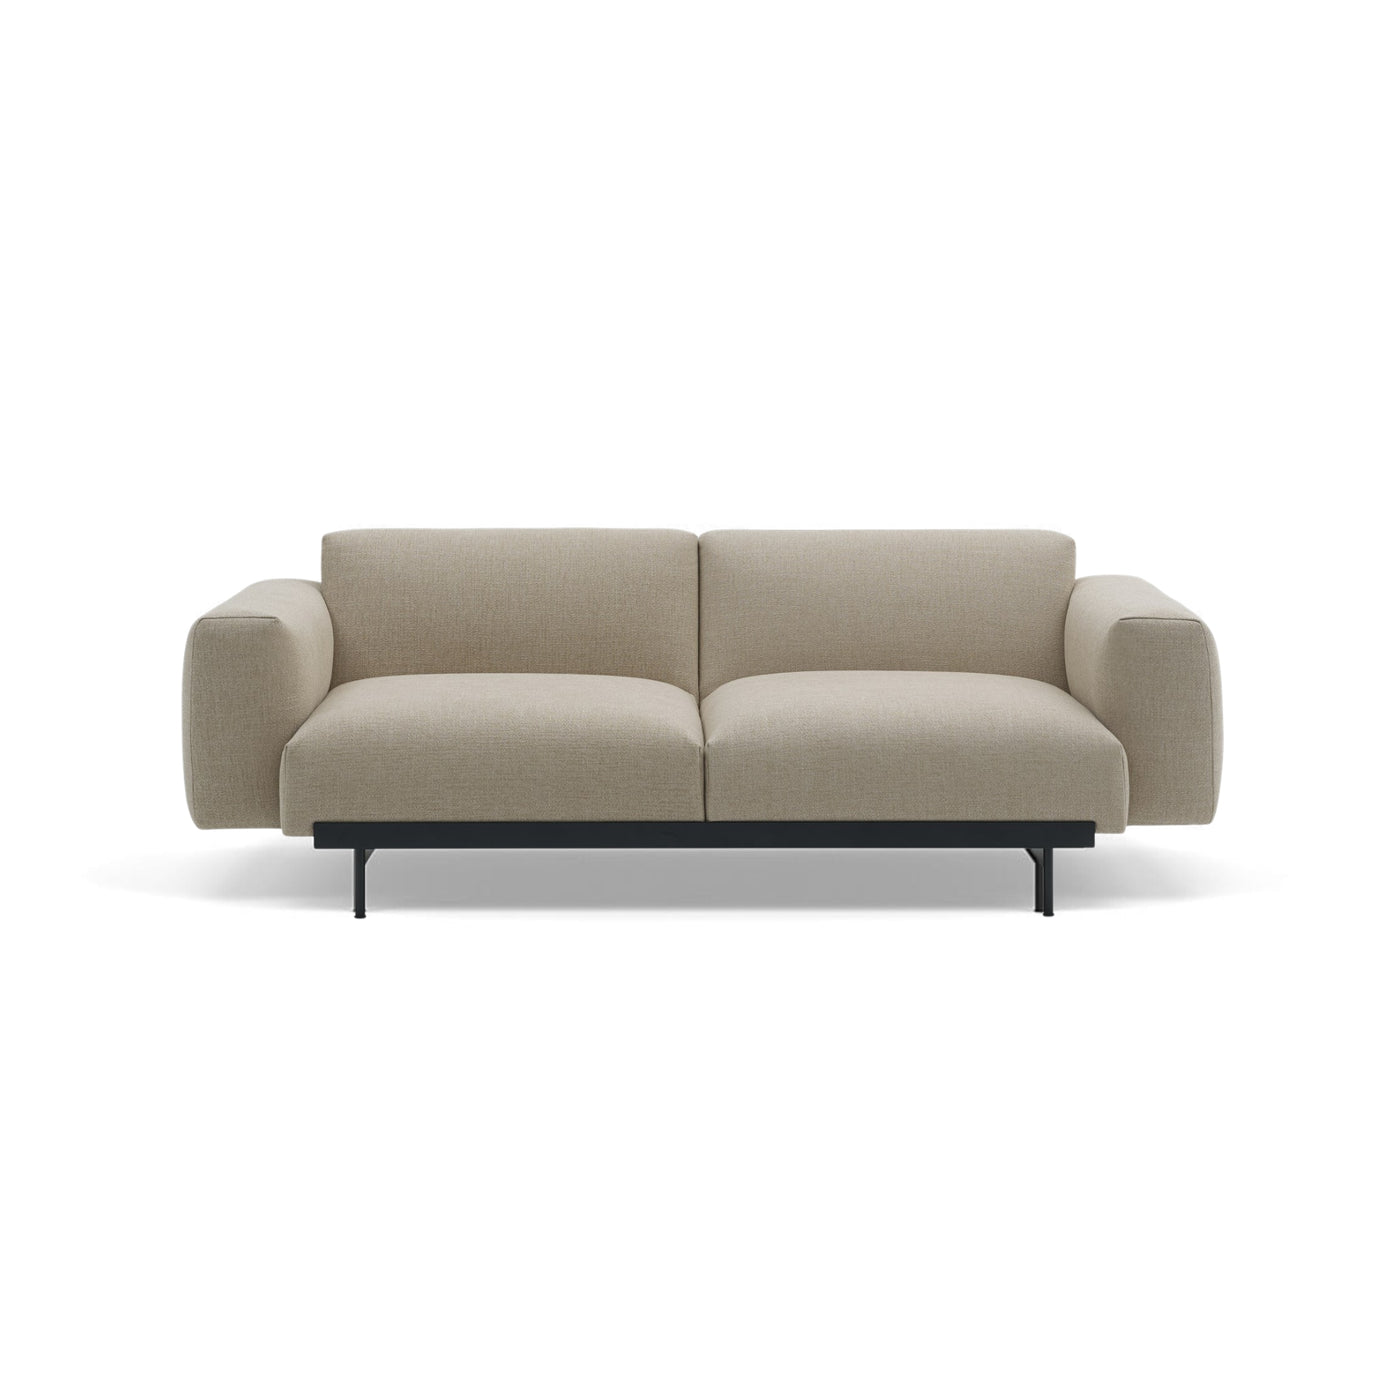 Muuto In Situ Modular 2 Seater Sofa, configuration 1. Made to order from someday designs #colour_ecriture-240